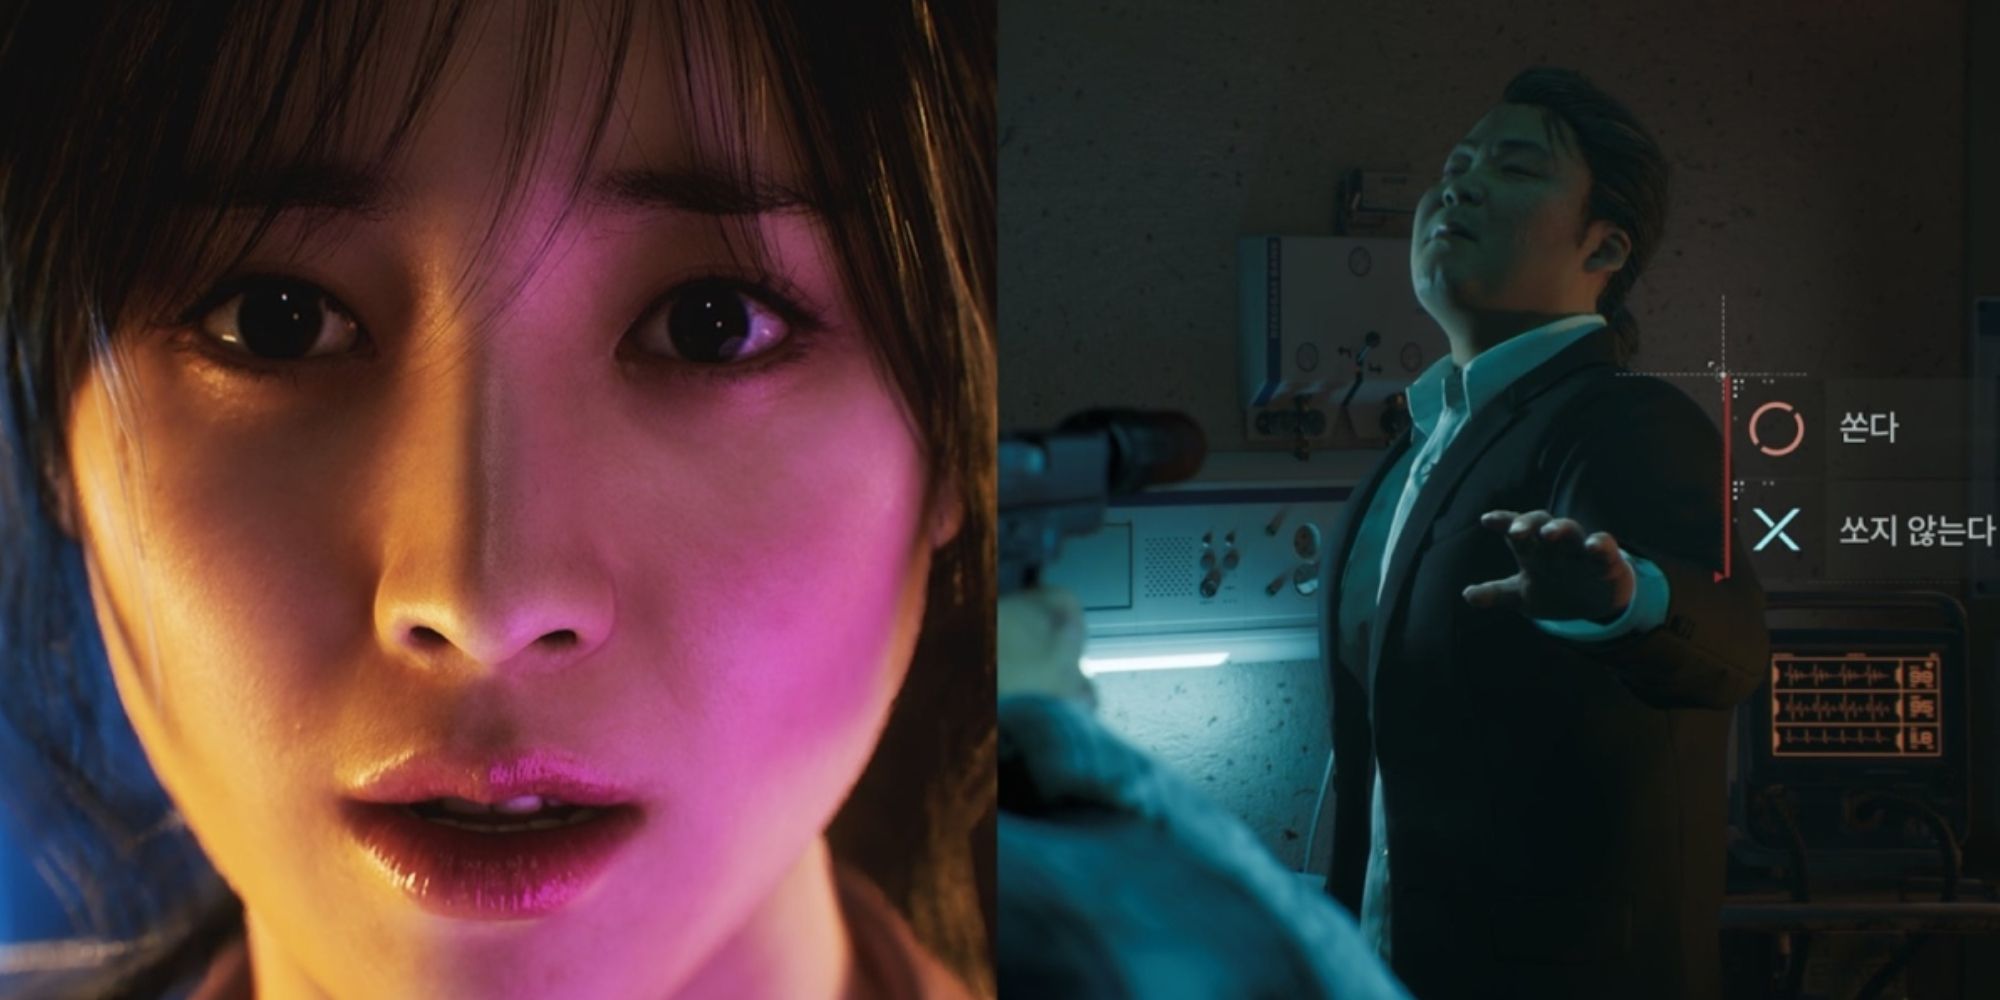 Photo realistic game characters from Project M. On the left a Korean women stares ahead with a shocked look on her face. On the right, a man raises his hand defensively, game interface is giving the player an option in Korean.